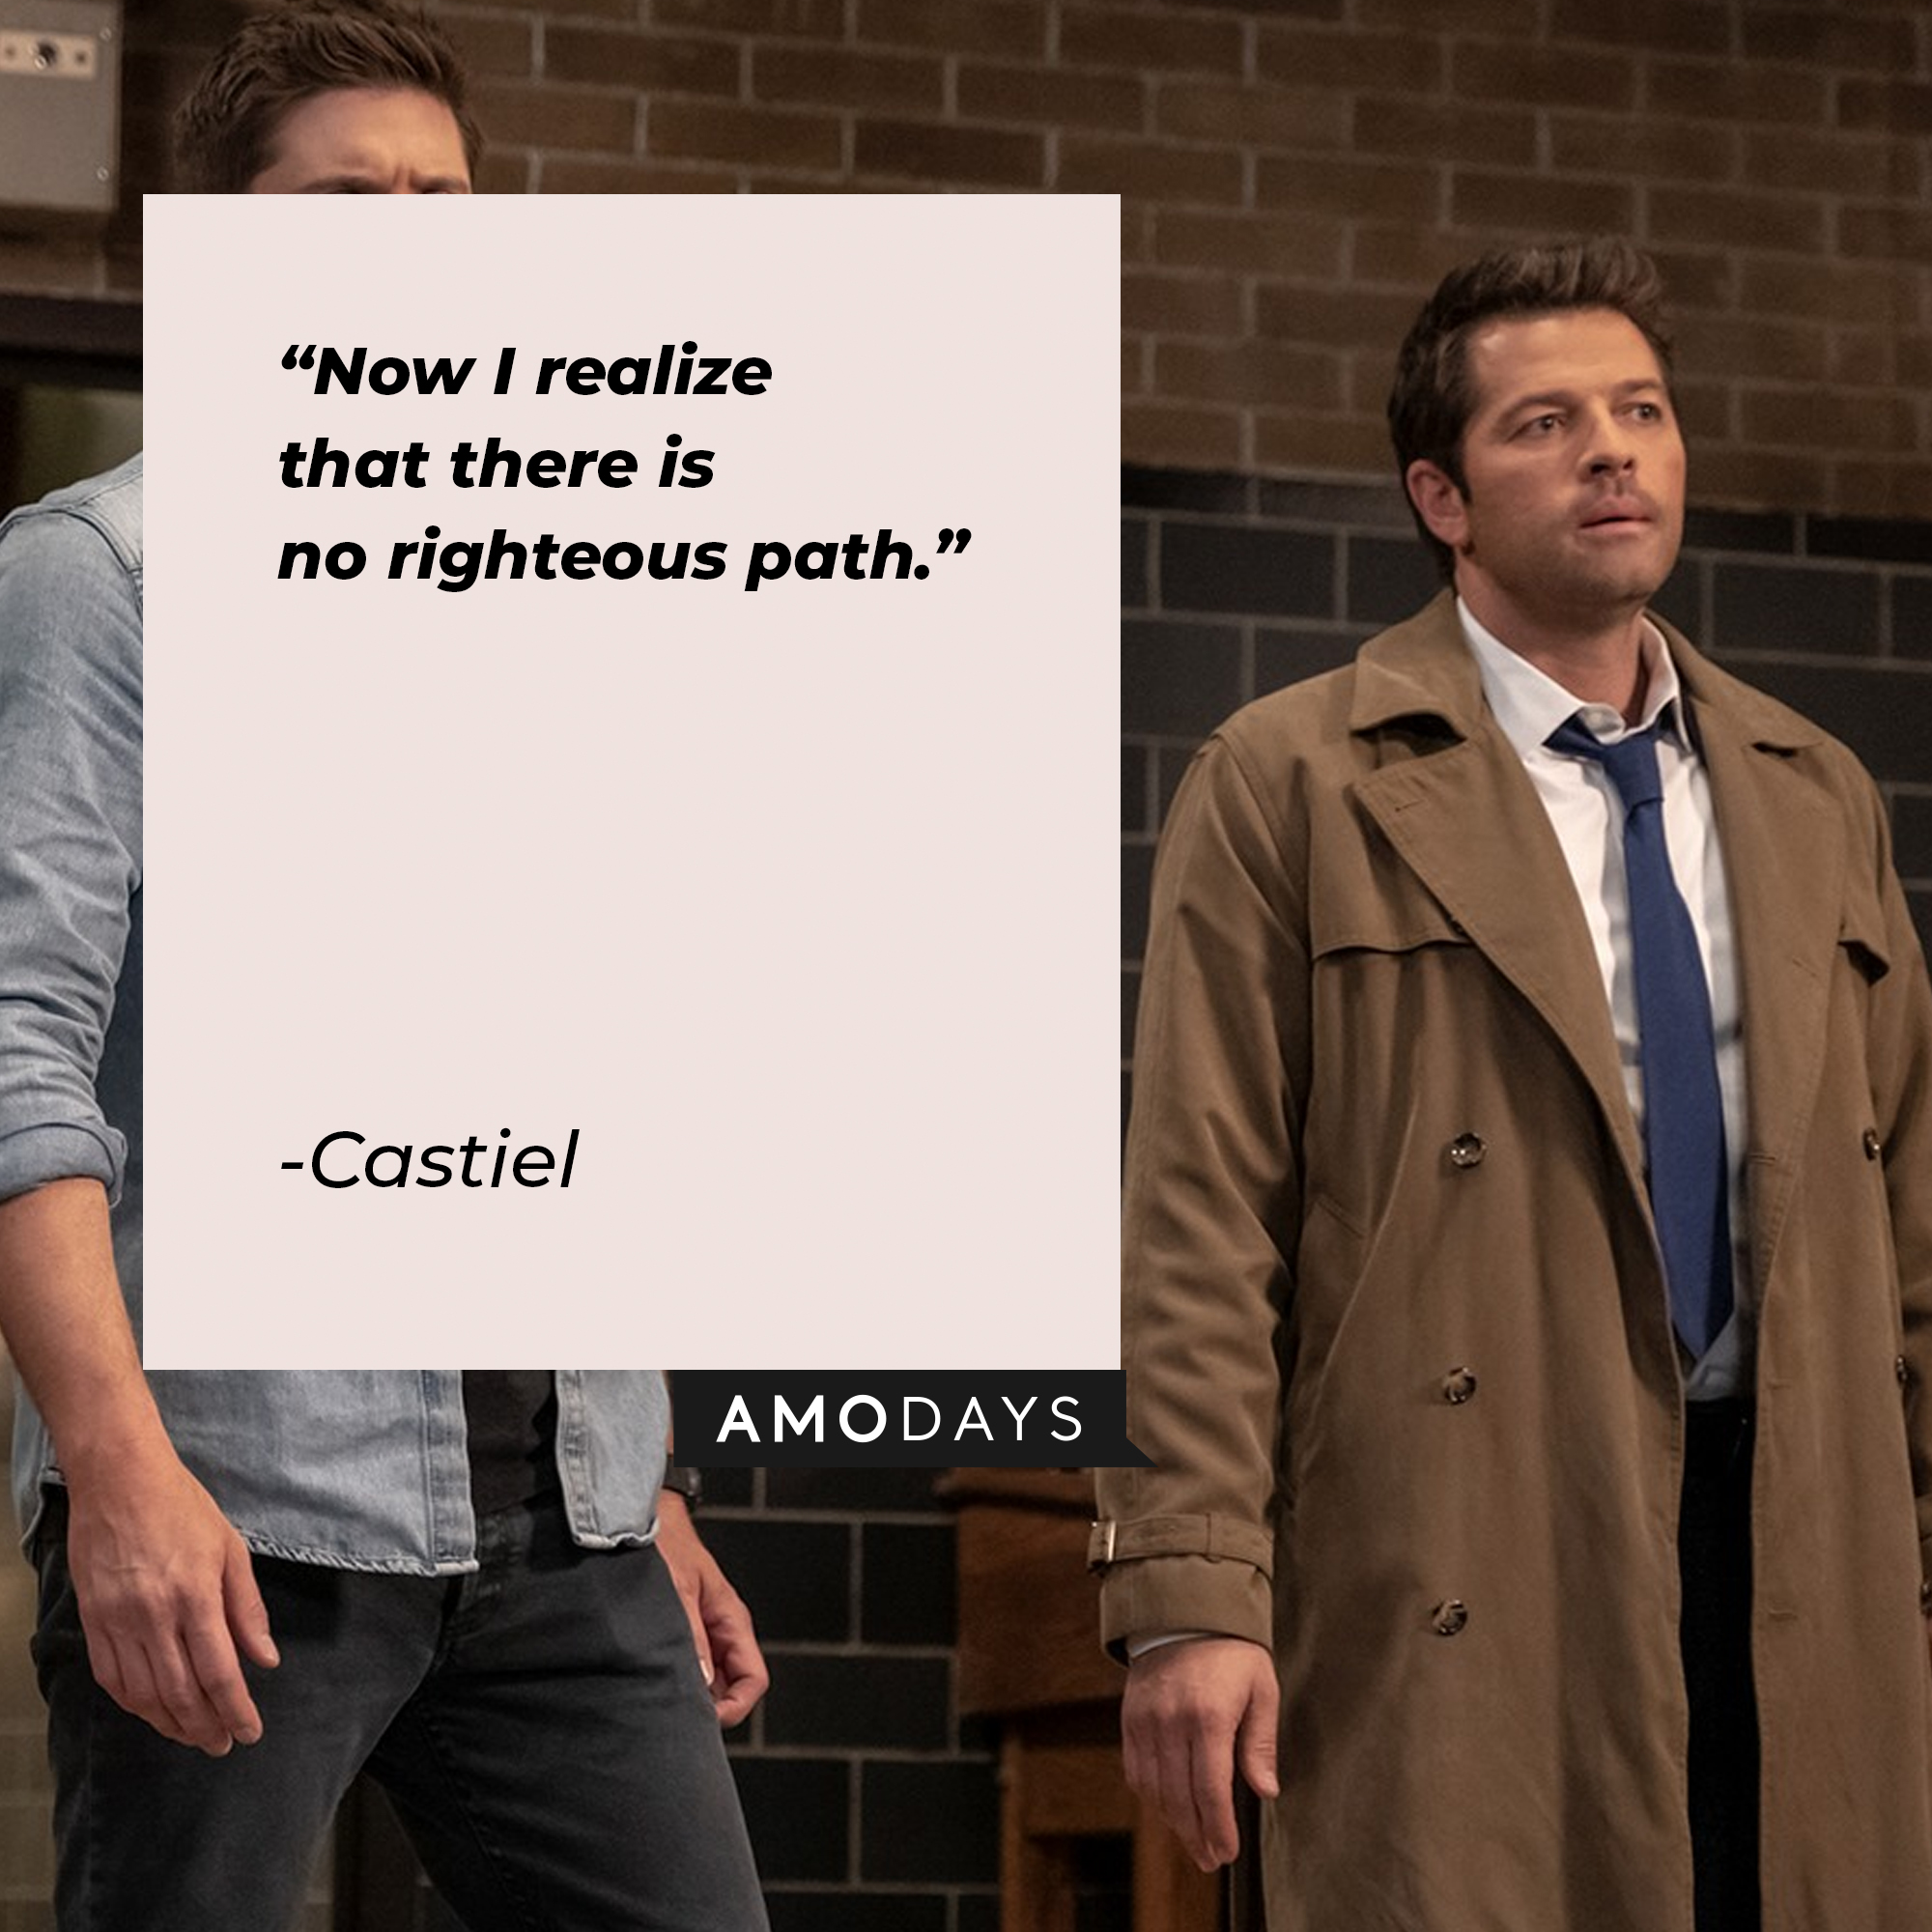 An image of Castiel with his quote: “Now I realize that there is no righteous path." | Source: facebook.com/Supernatural